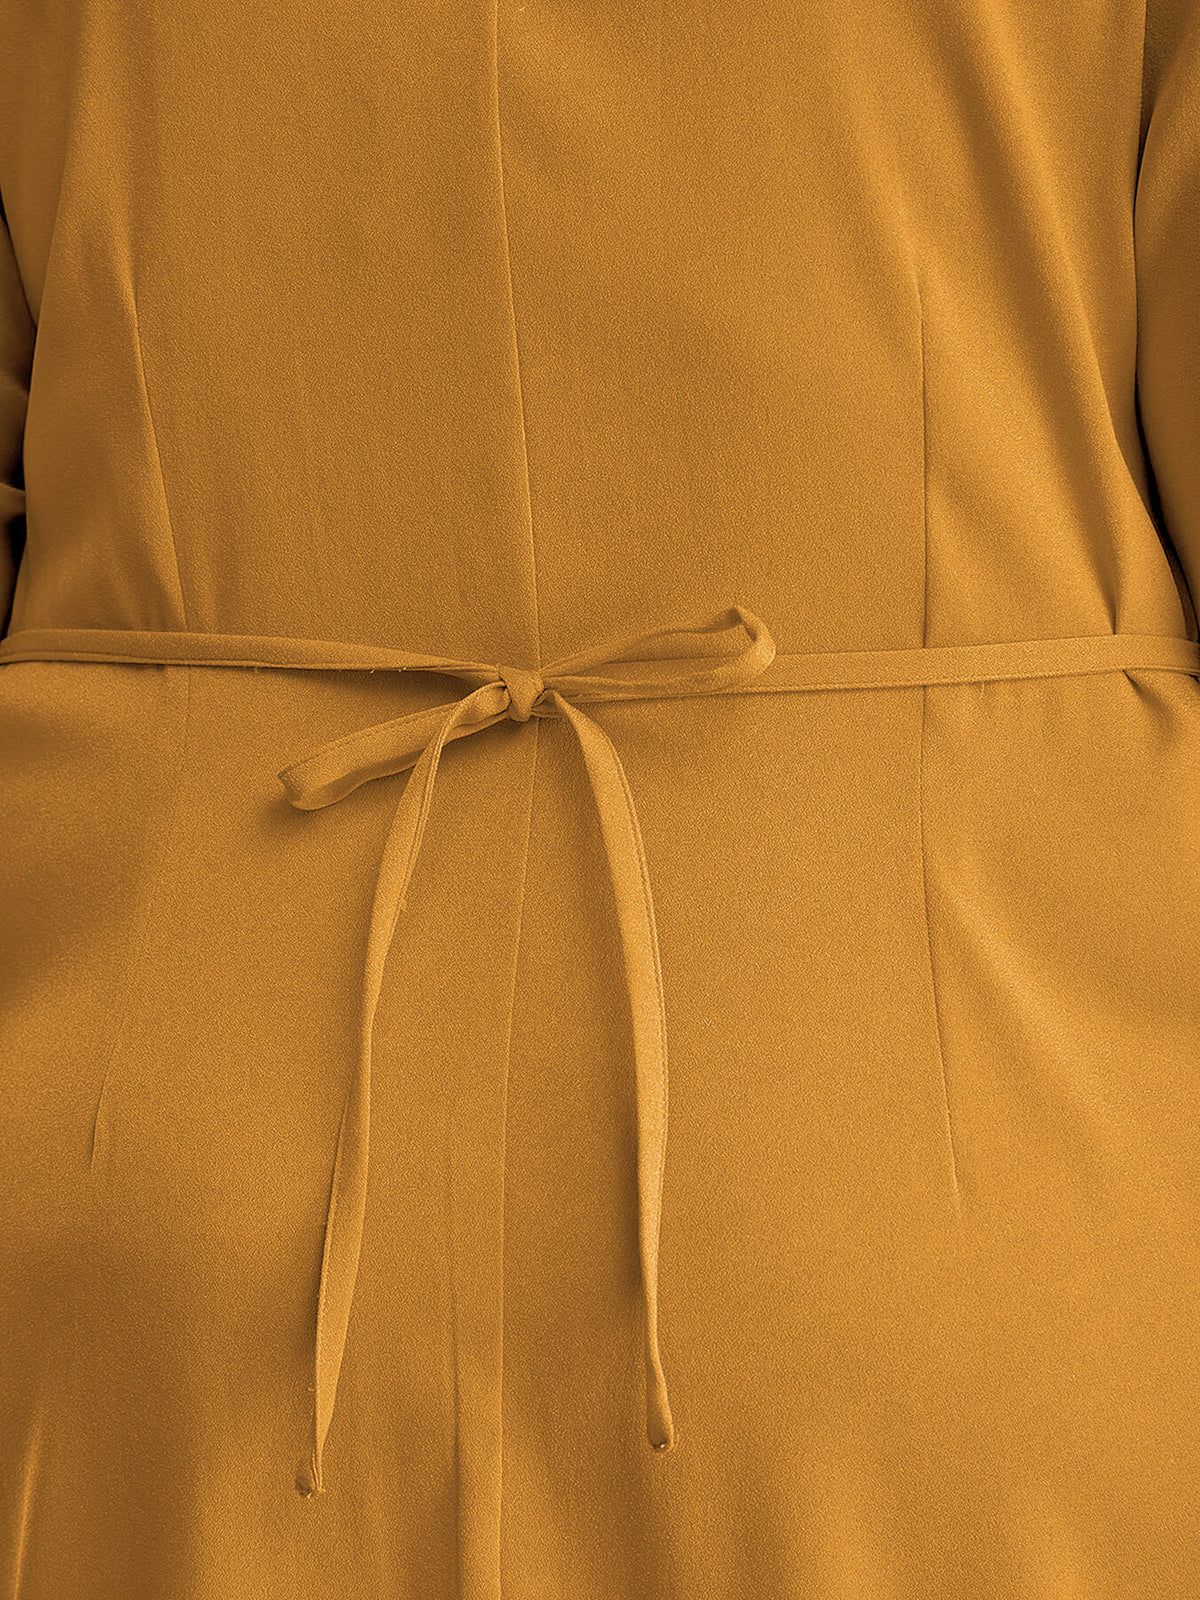 Shift Dress With Attached Belt - Mustard